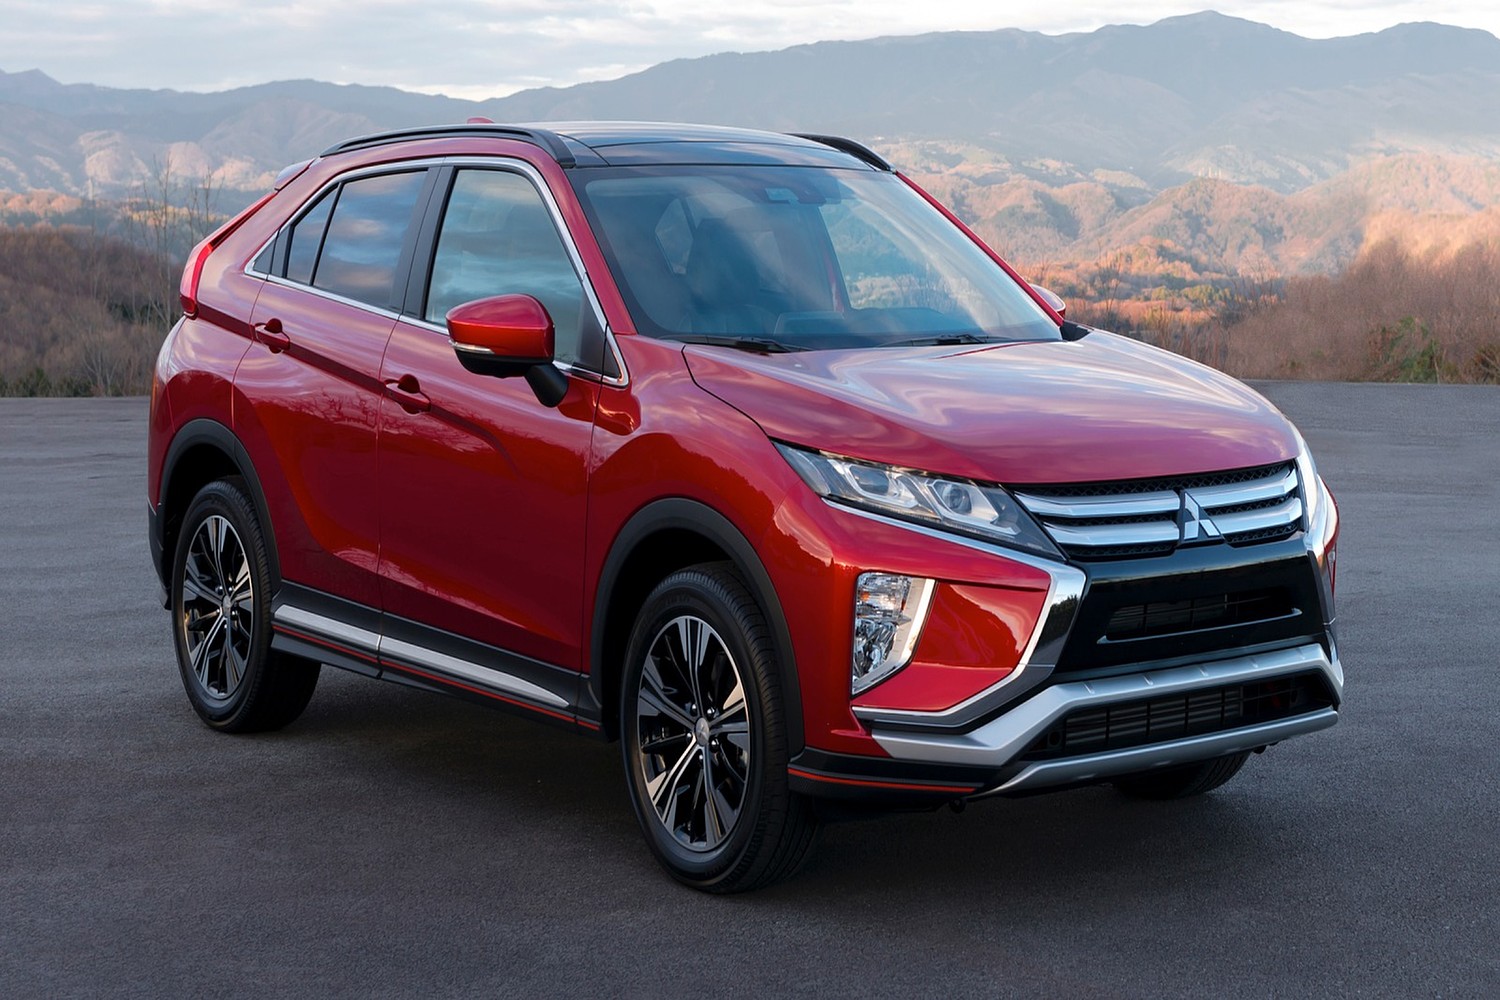 2018 Mitsubishi Eclipse Cross 4dr SUV Exterior. Target Launch Winter 2018.